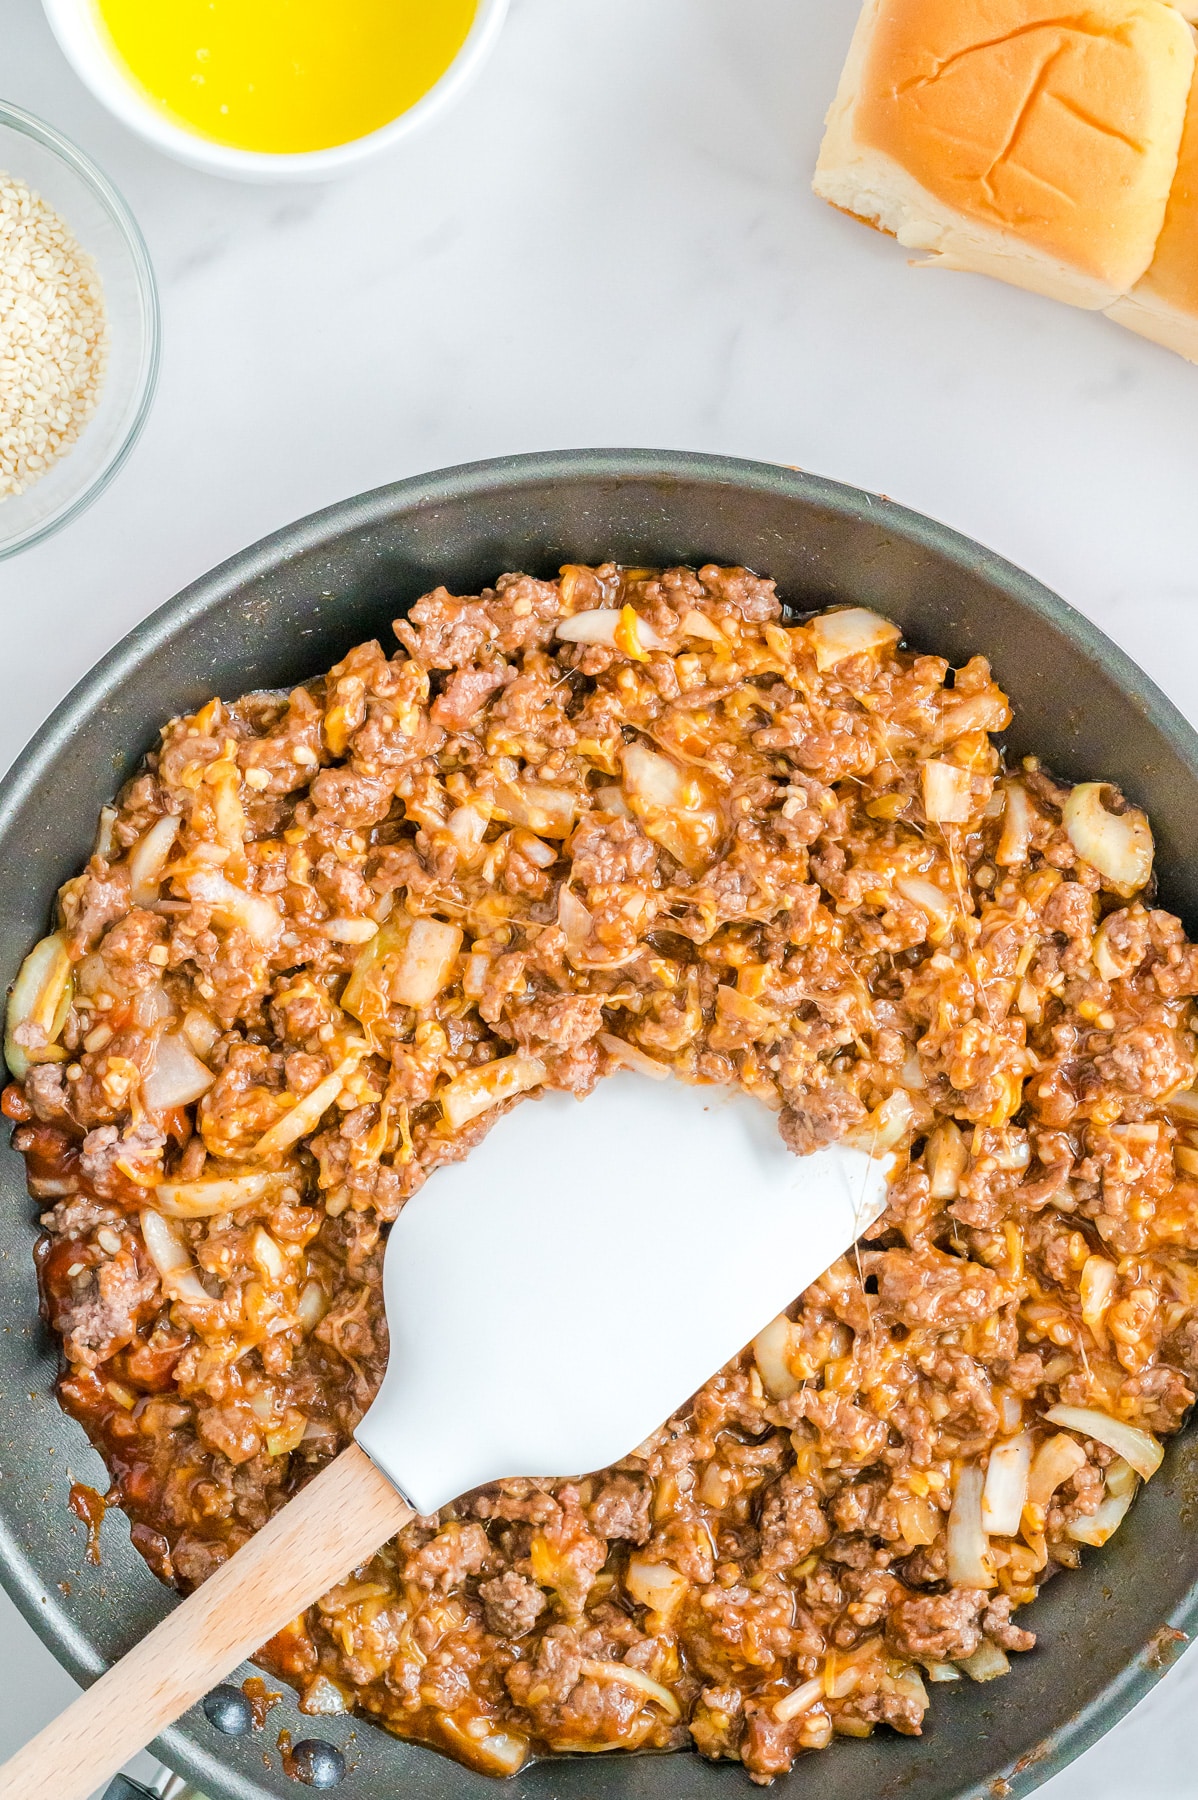 A skillet filled with ground beef, onion and sloppy joe sauce.